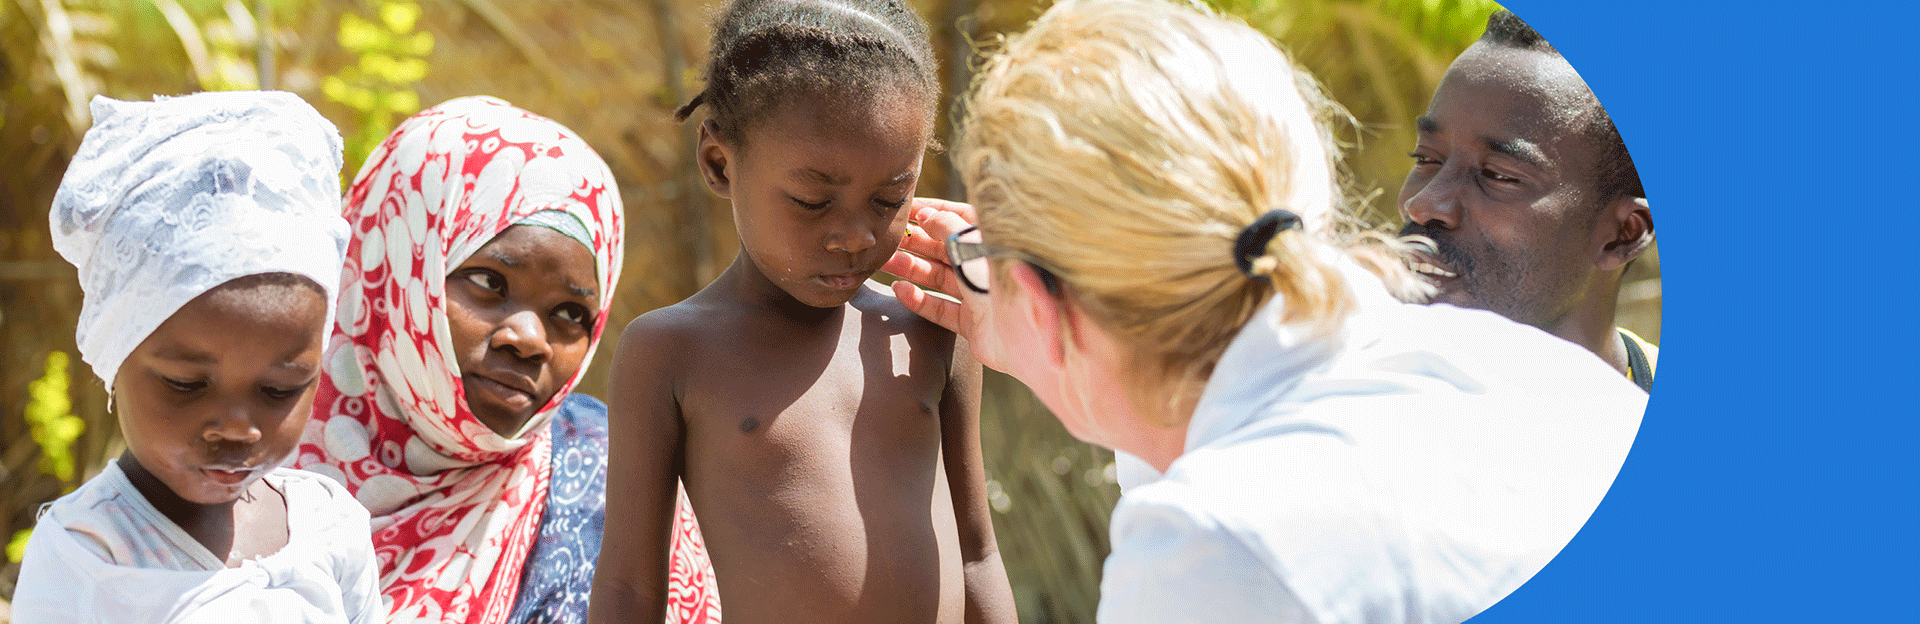 A dermatologist examining a young patient